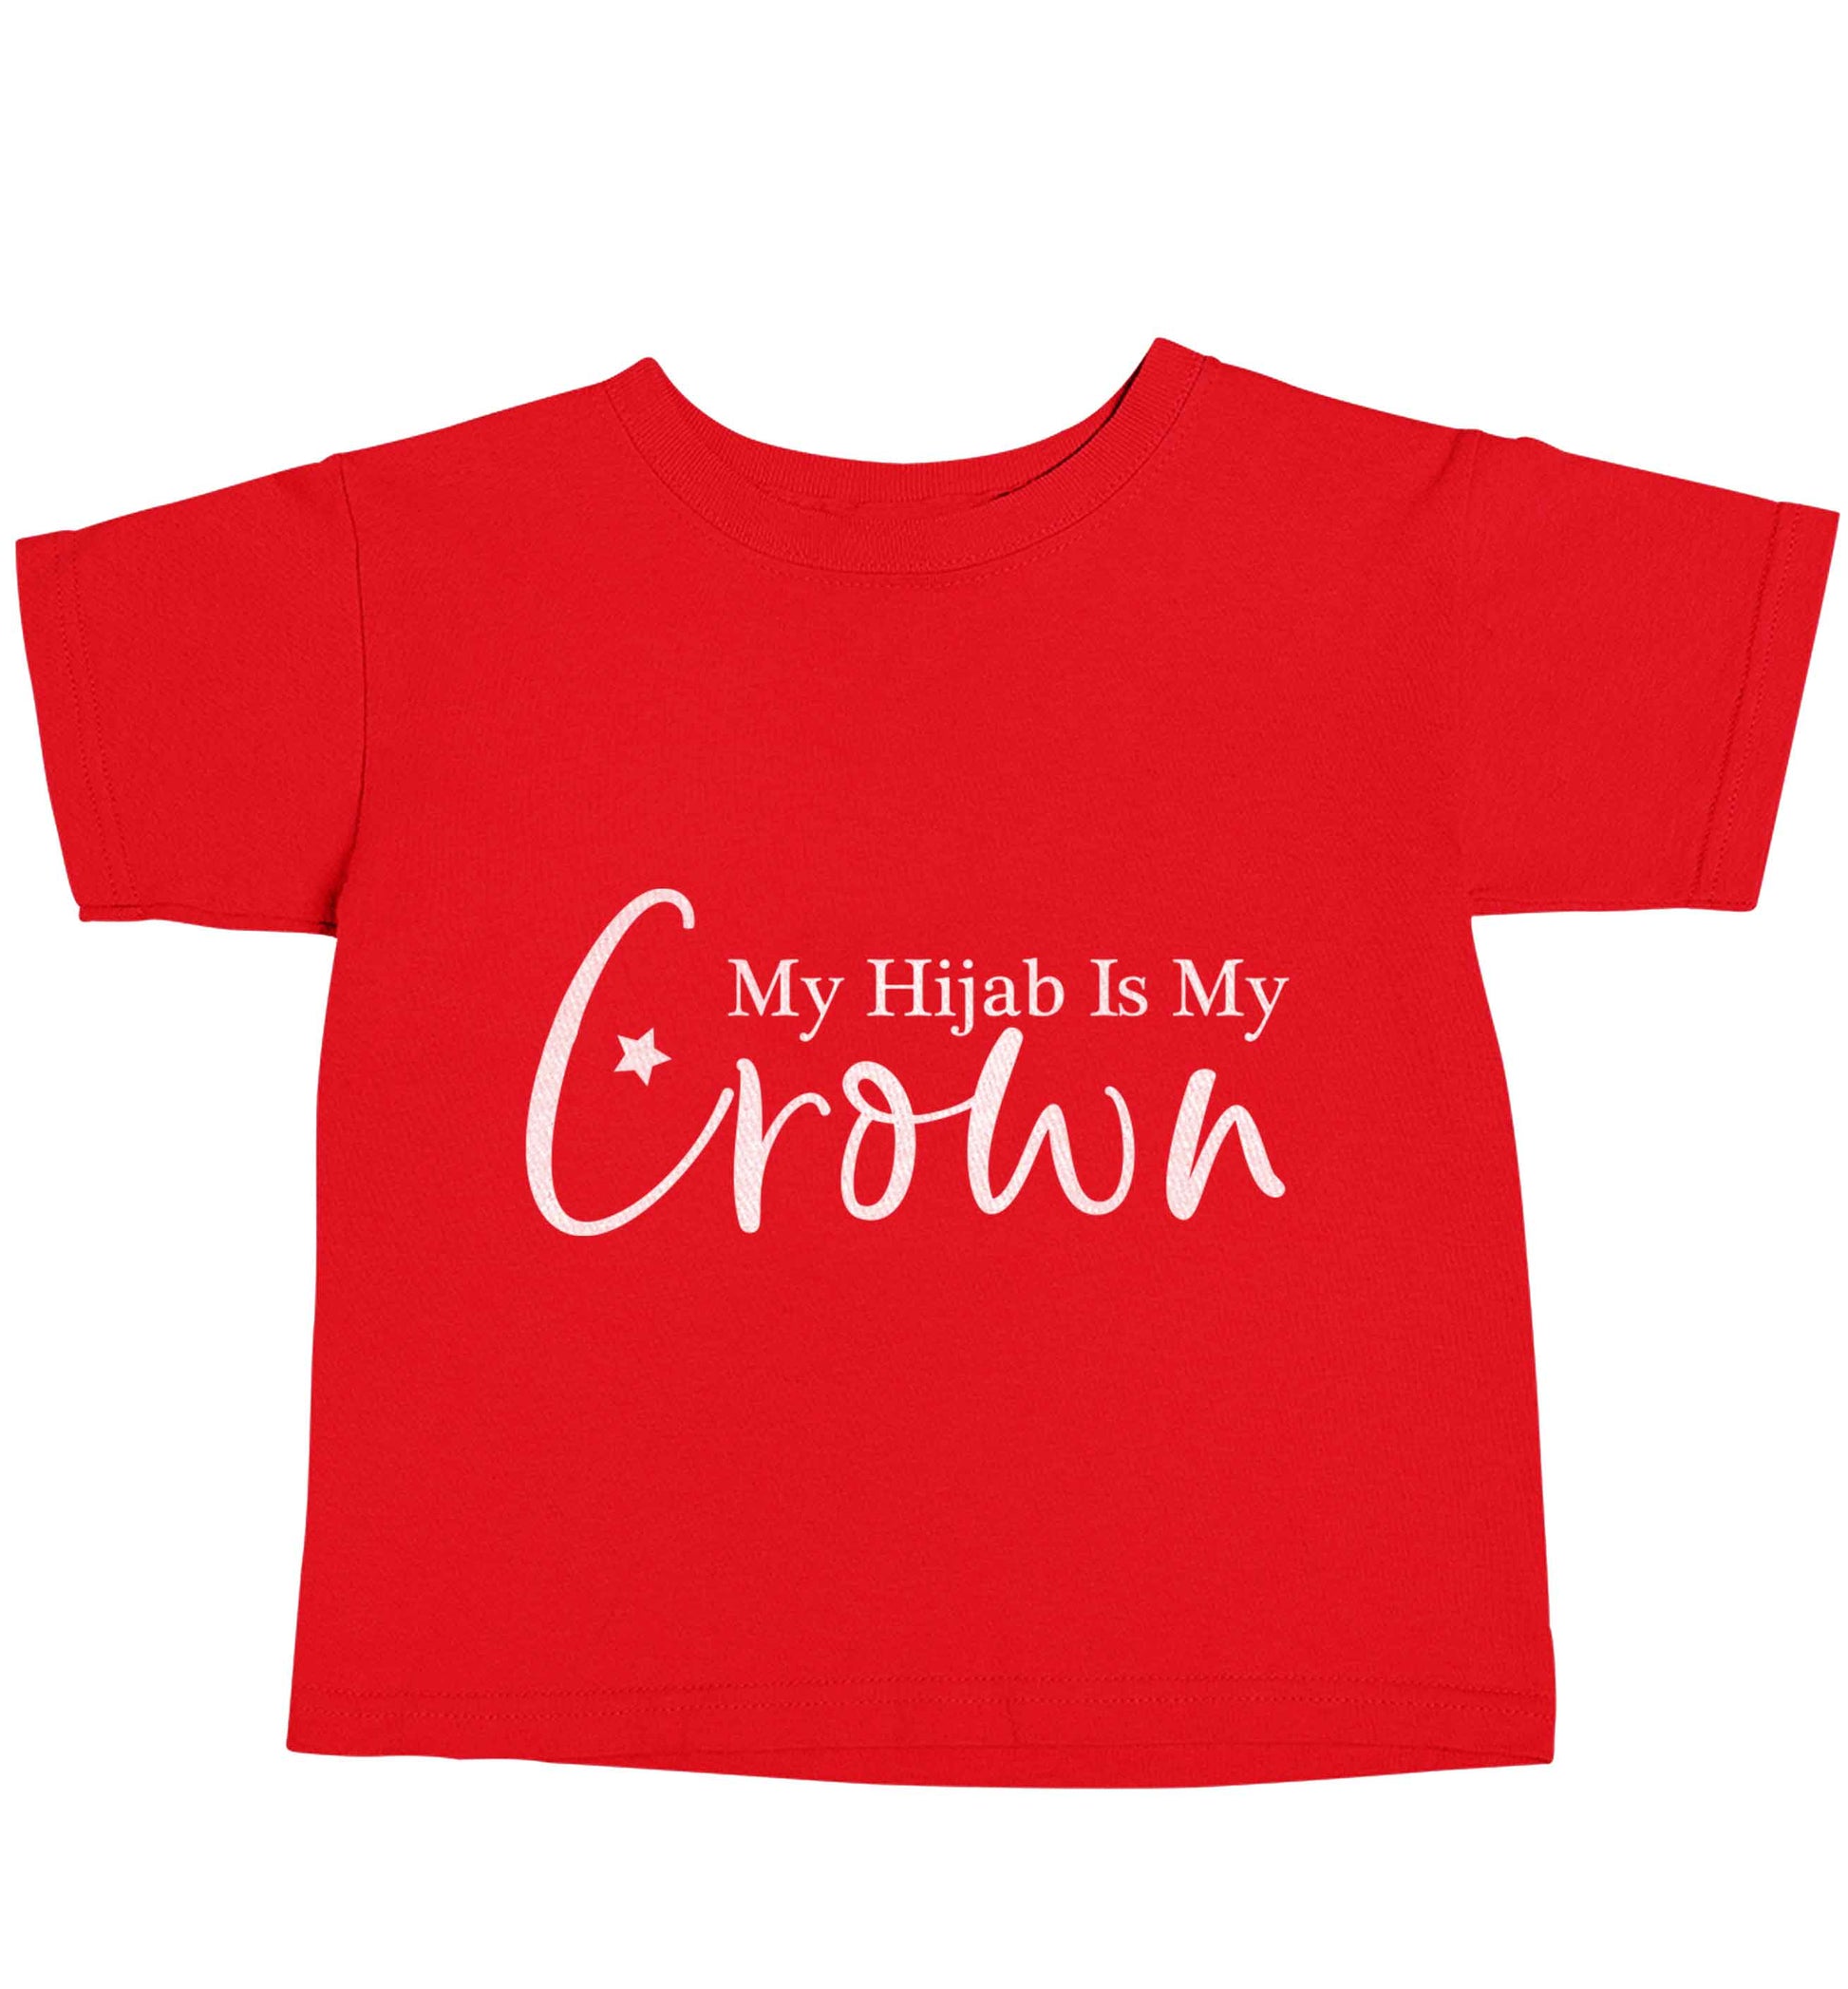 My hijab is my crown red baby toddler Tshirt 2 Years